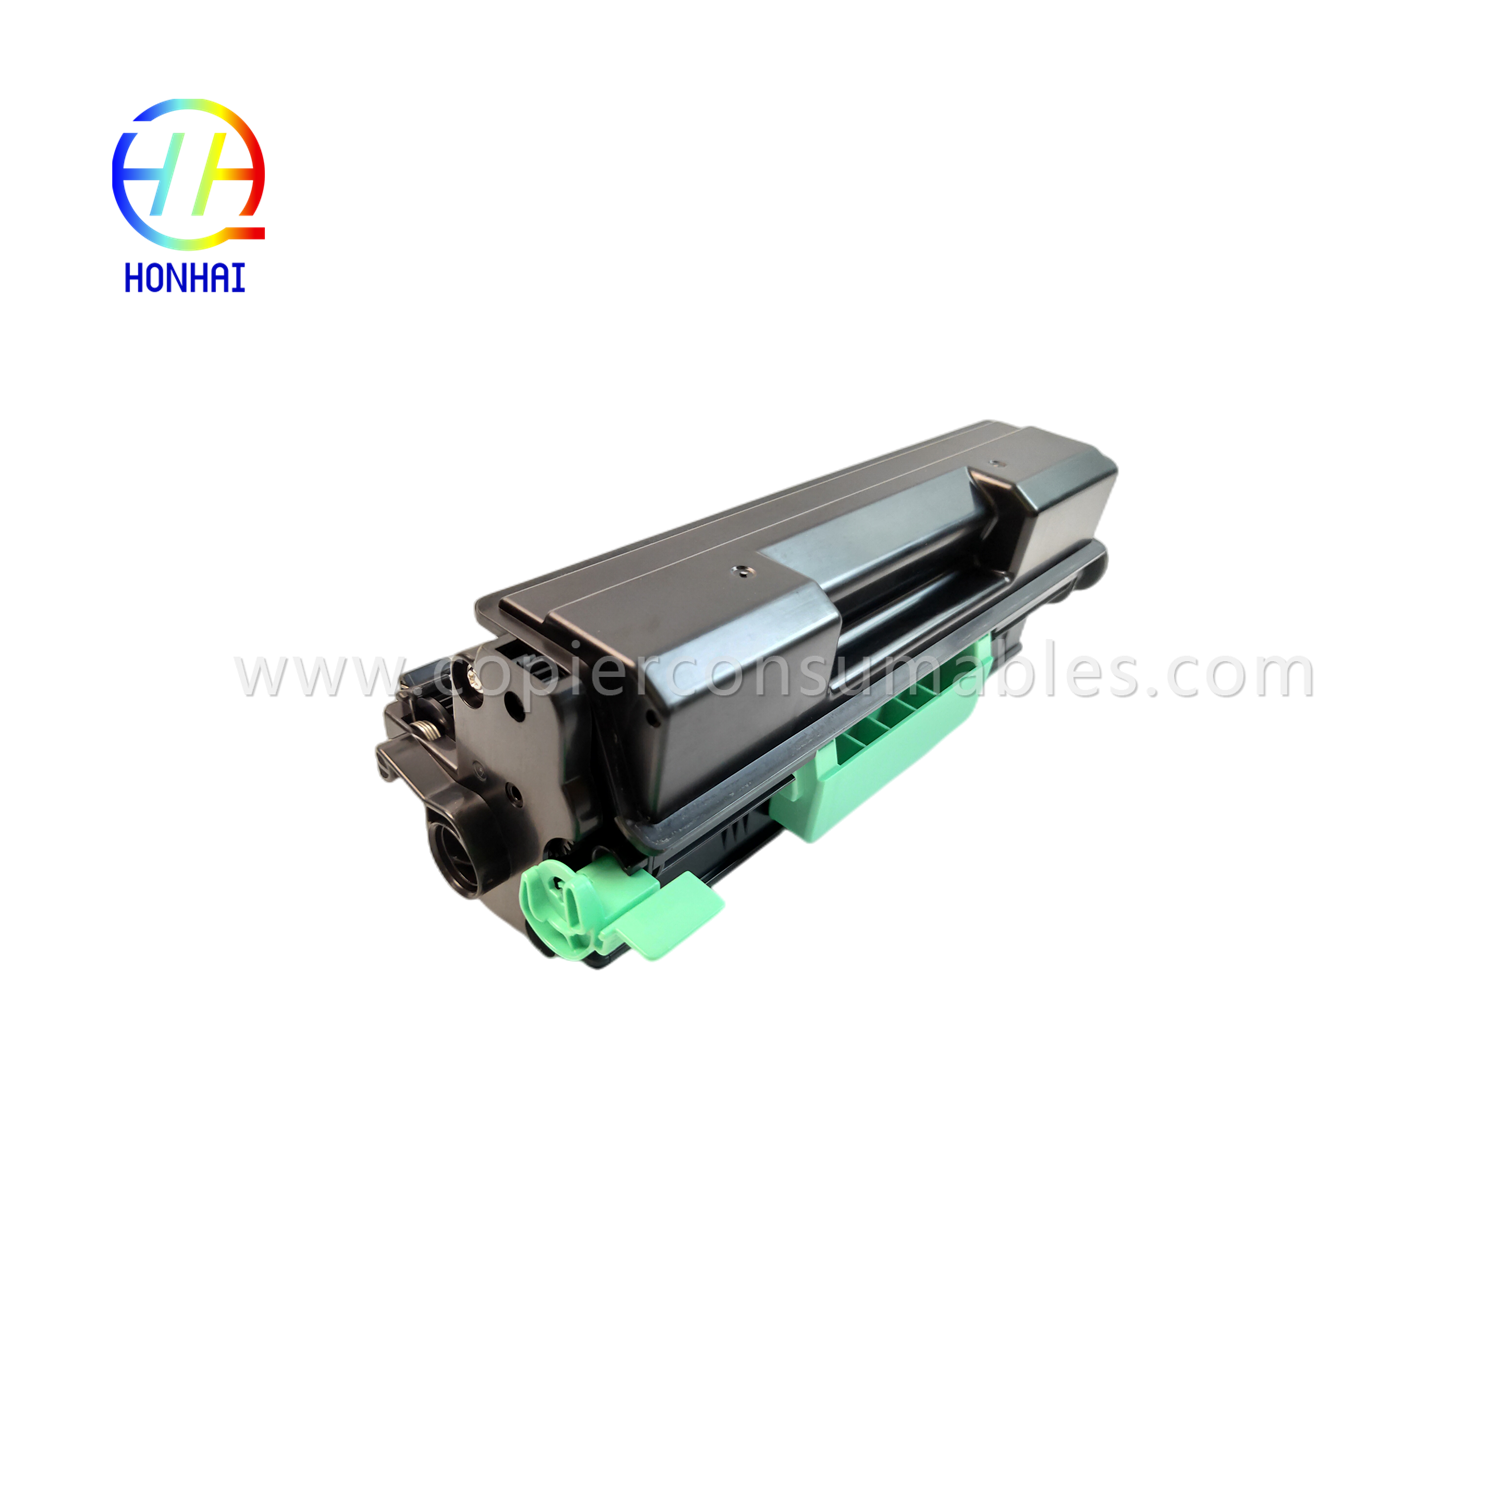 https://c585.goodao.net/toner-cartridge-%ef%bc%88japan-powder%ef%bc%89for-ricoh-mp401-mp401spf-mp402-mp402spf-sp4520-sp-4520dn-ref-841887-product /